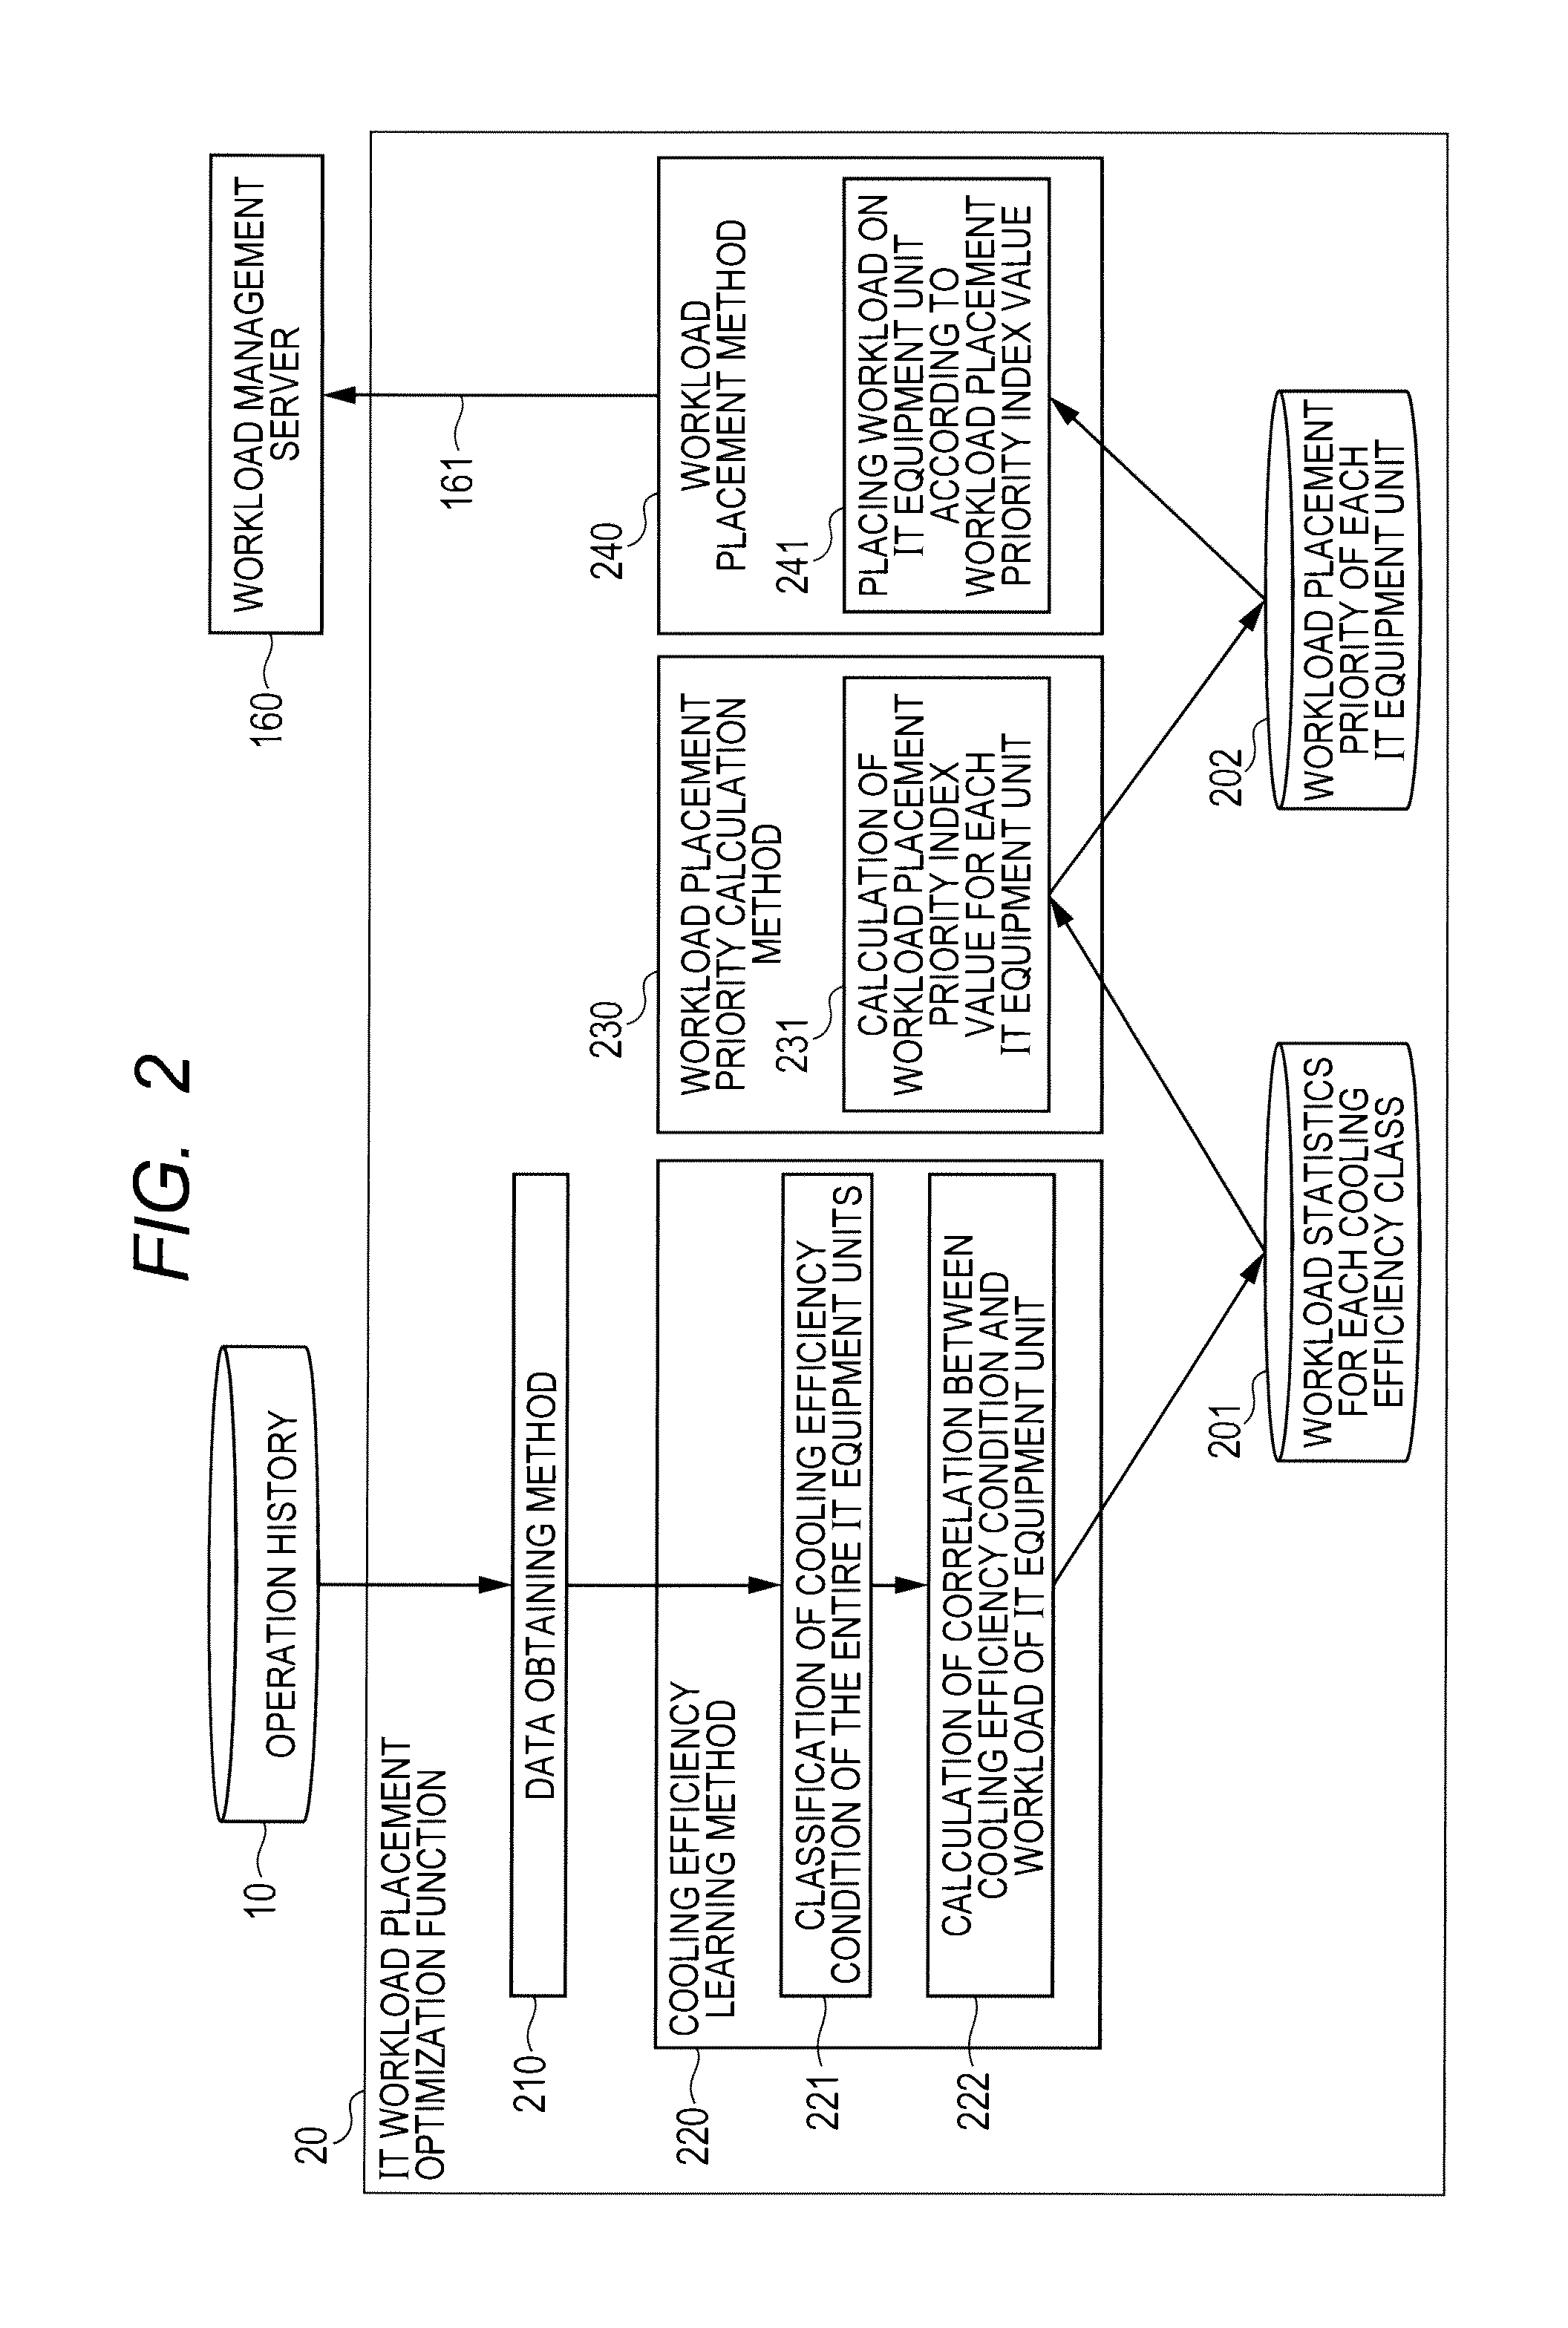 Operation management method of information processing system